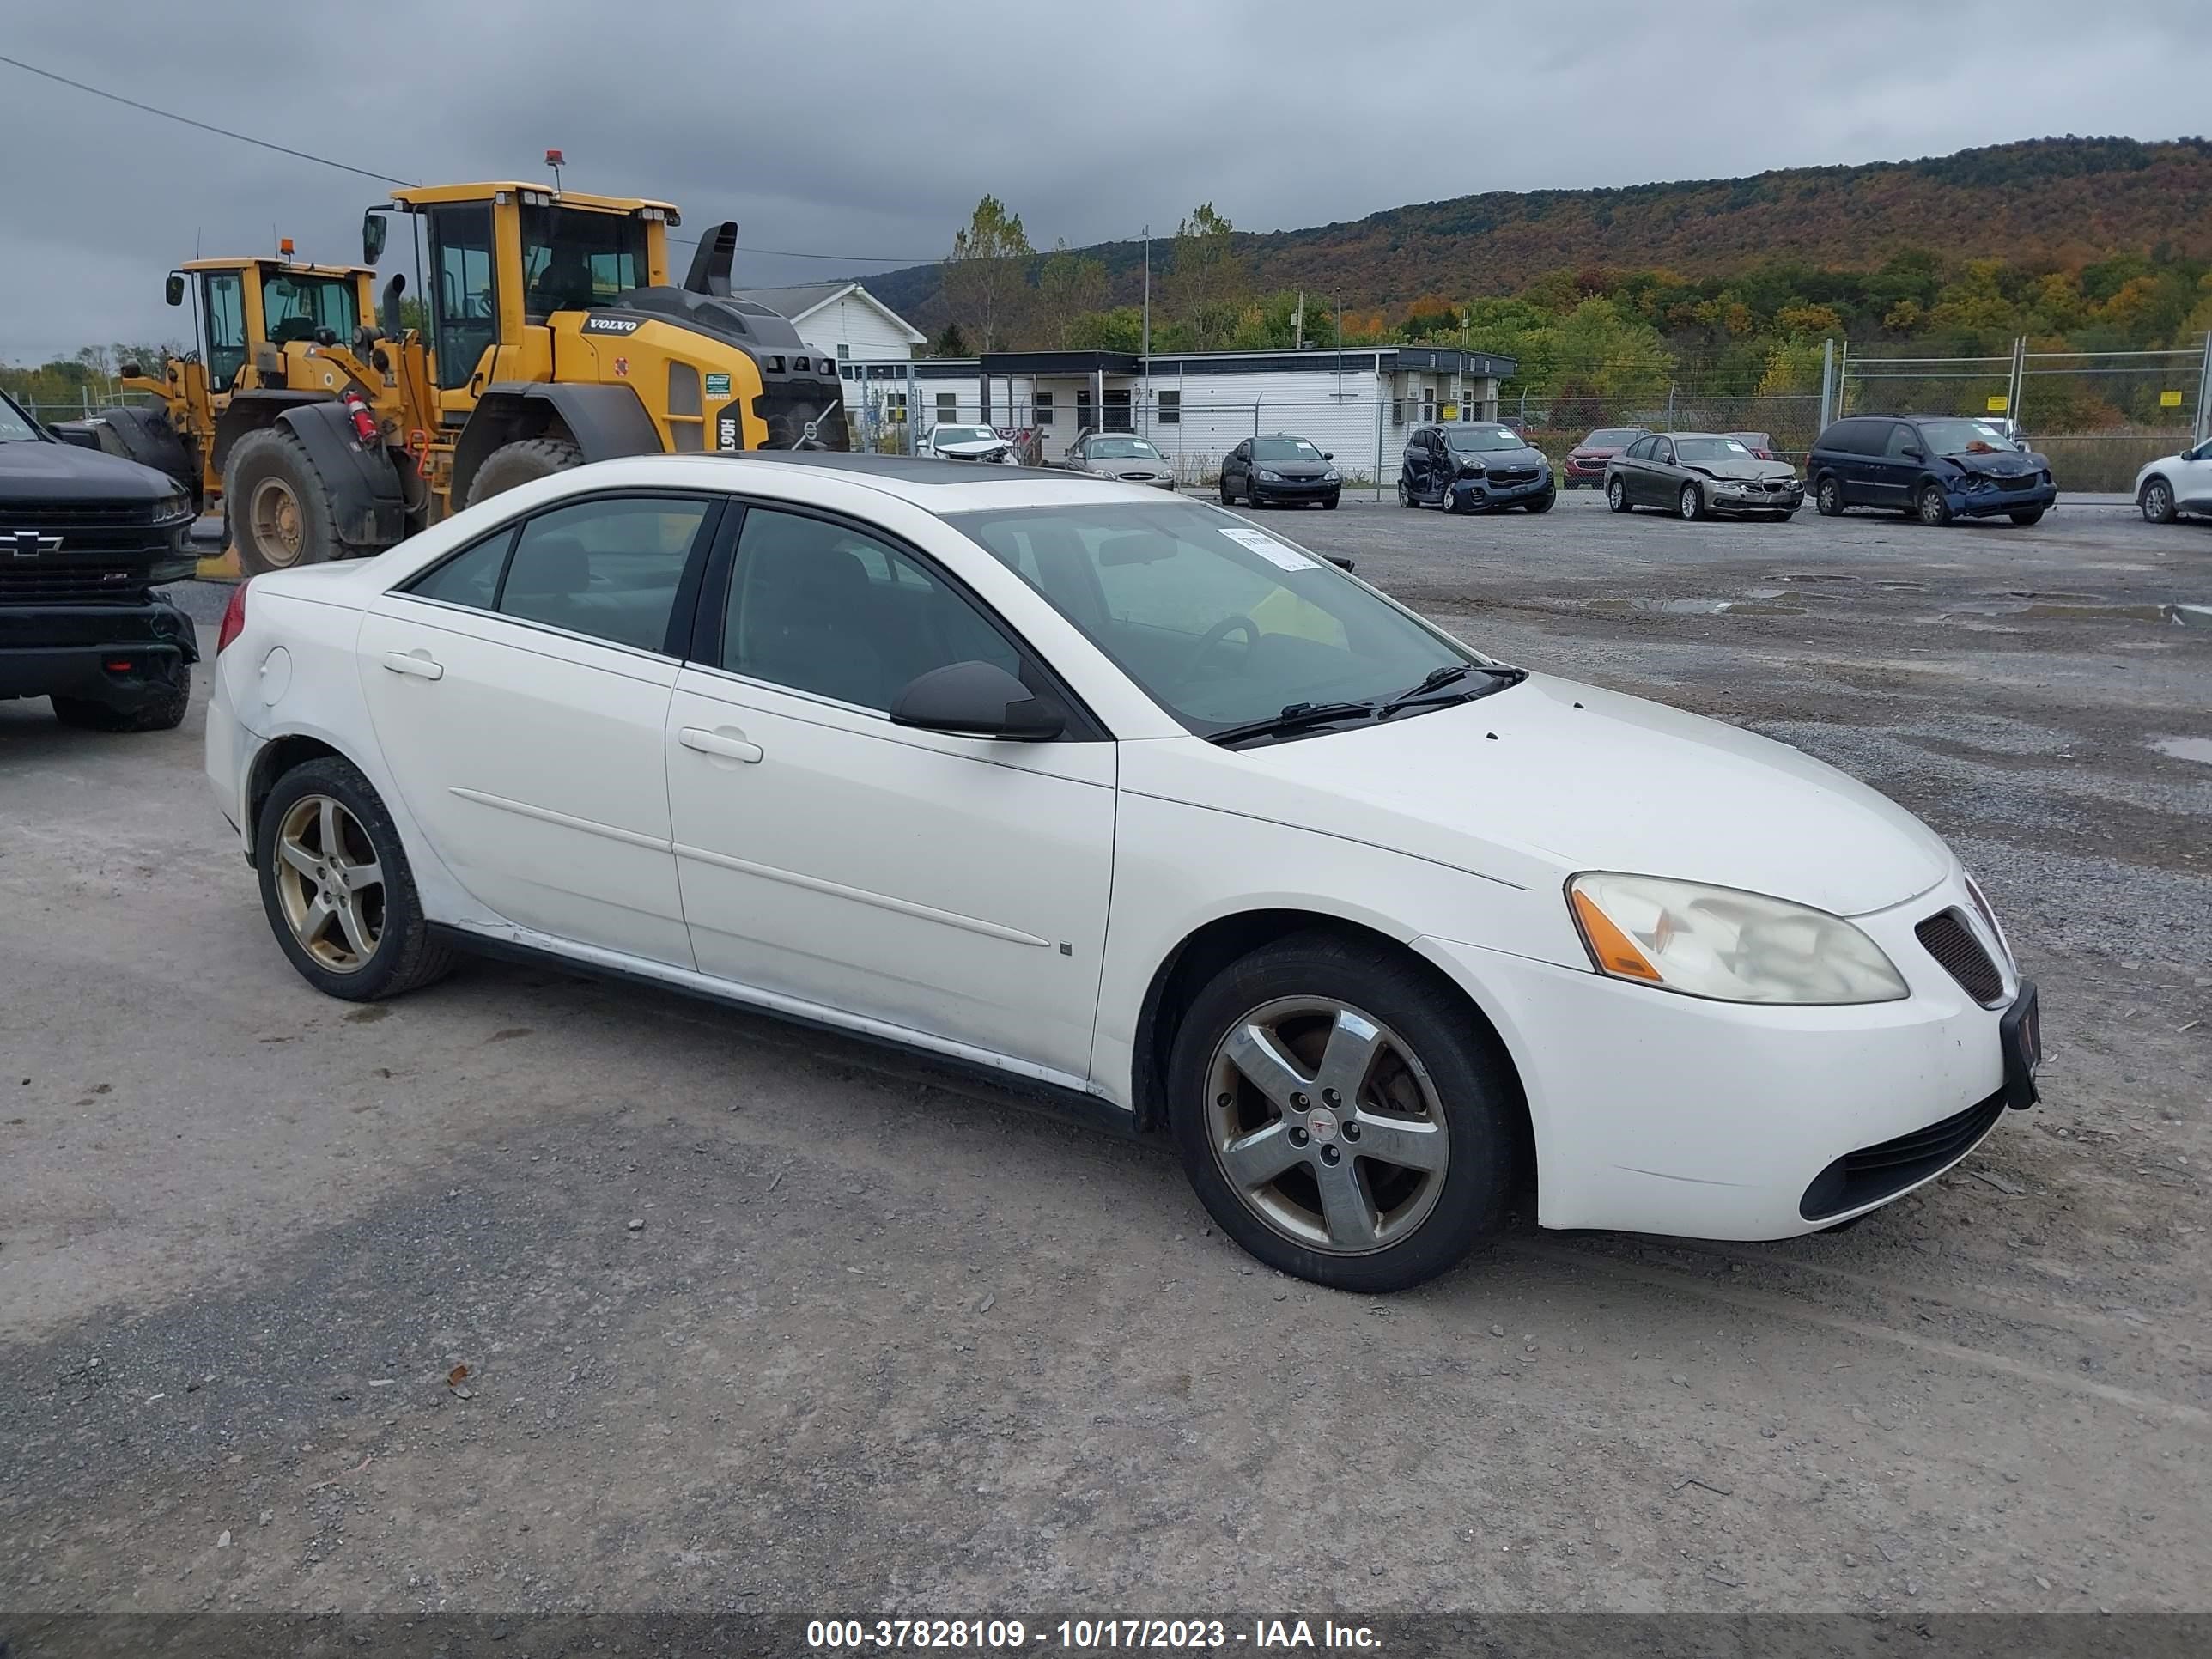 vin: 1G2ZH558564168038 1G2ZH558564168038 2006 pontiac g6 3500 for Sale in 16637, 15369 Dunnings Hwy, East Freedom, Pennsylvania, USA